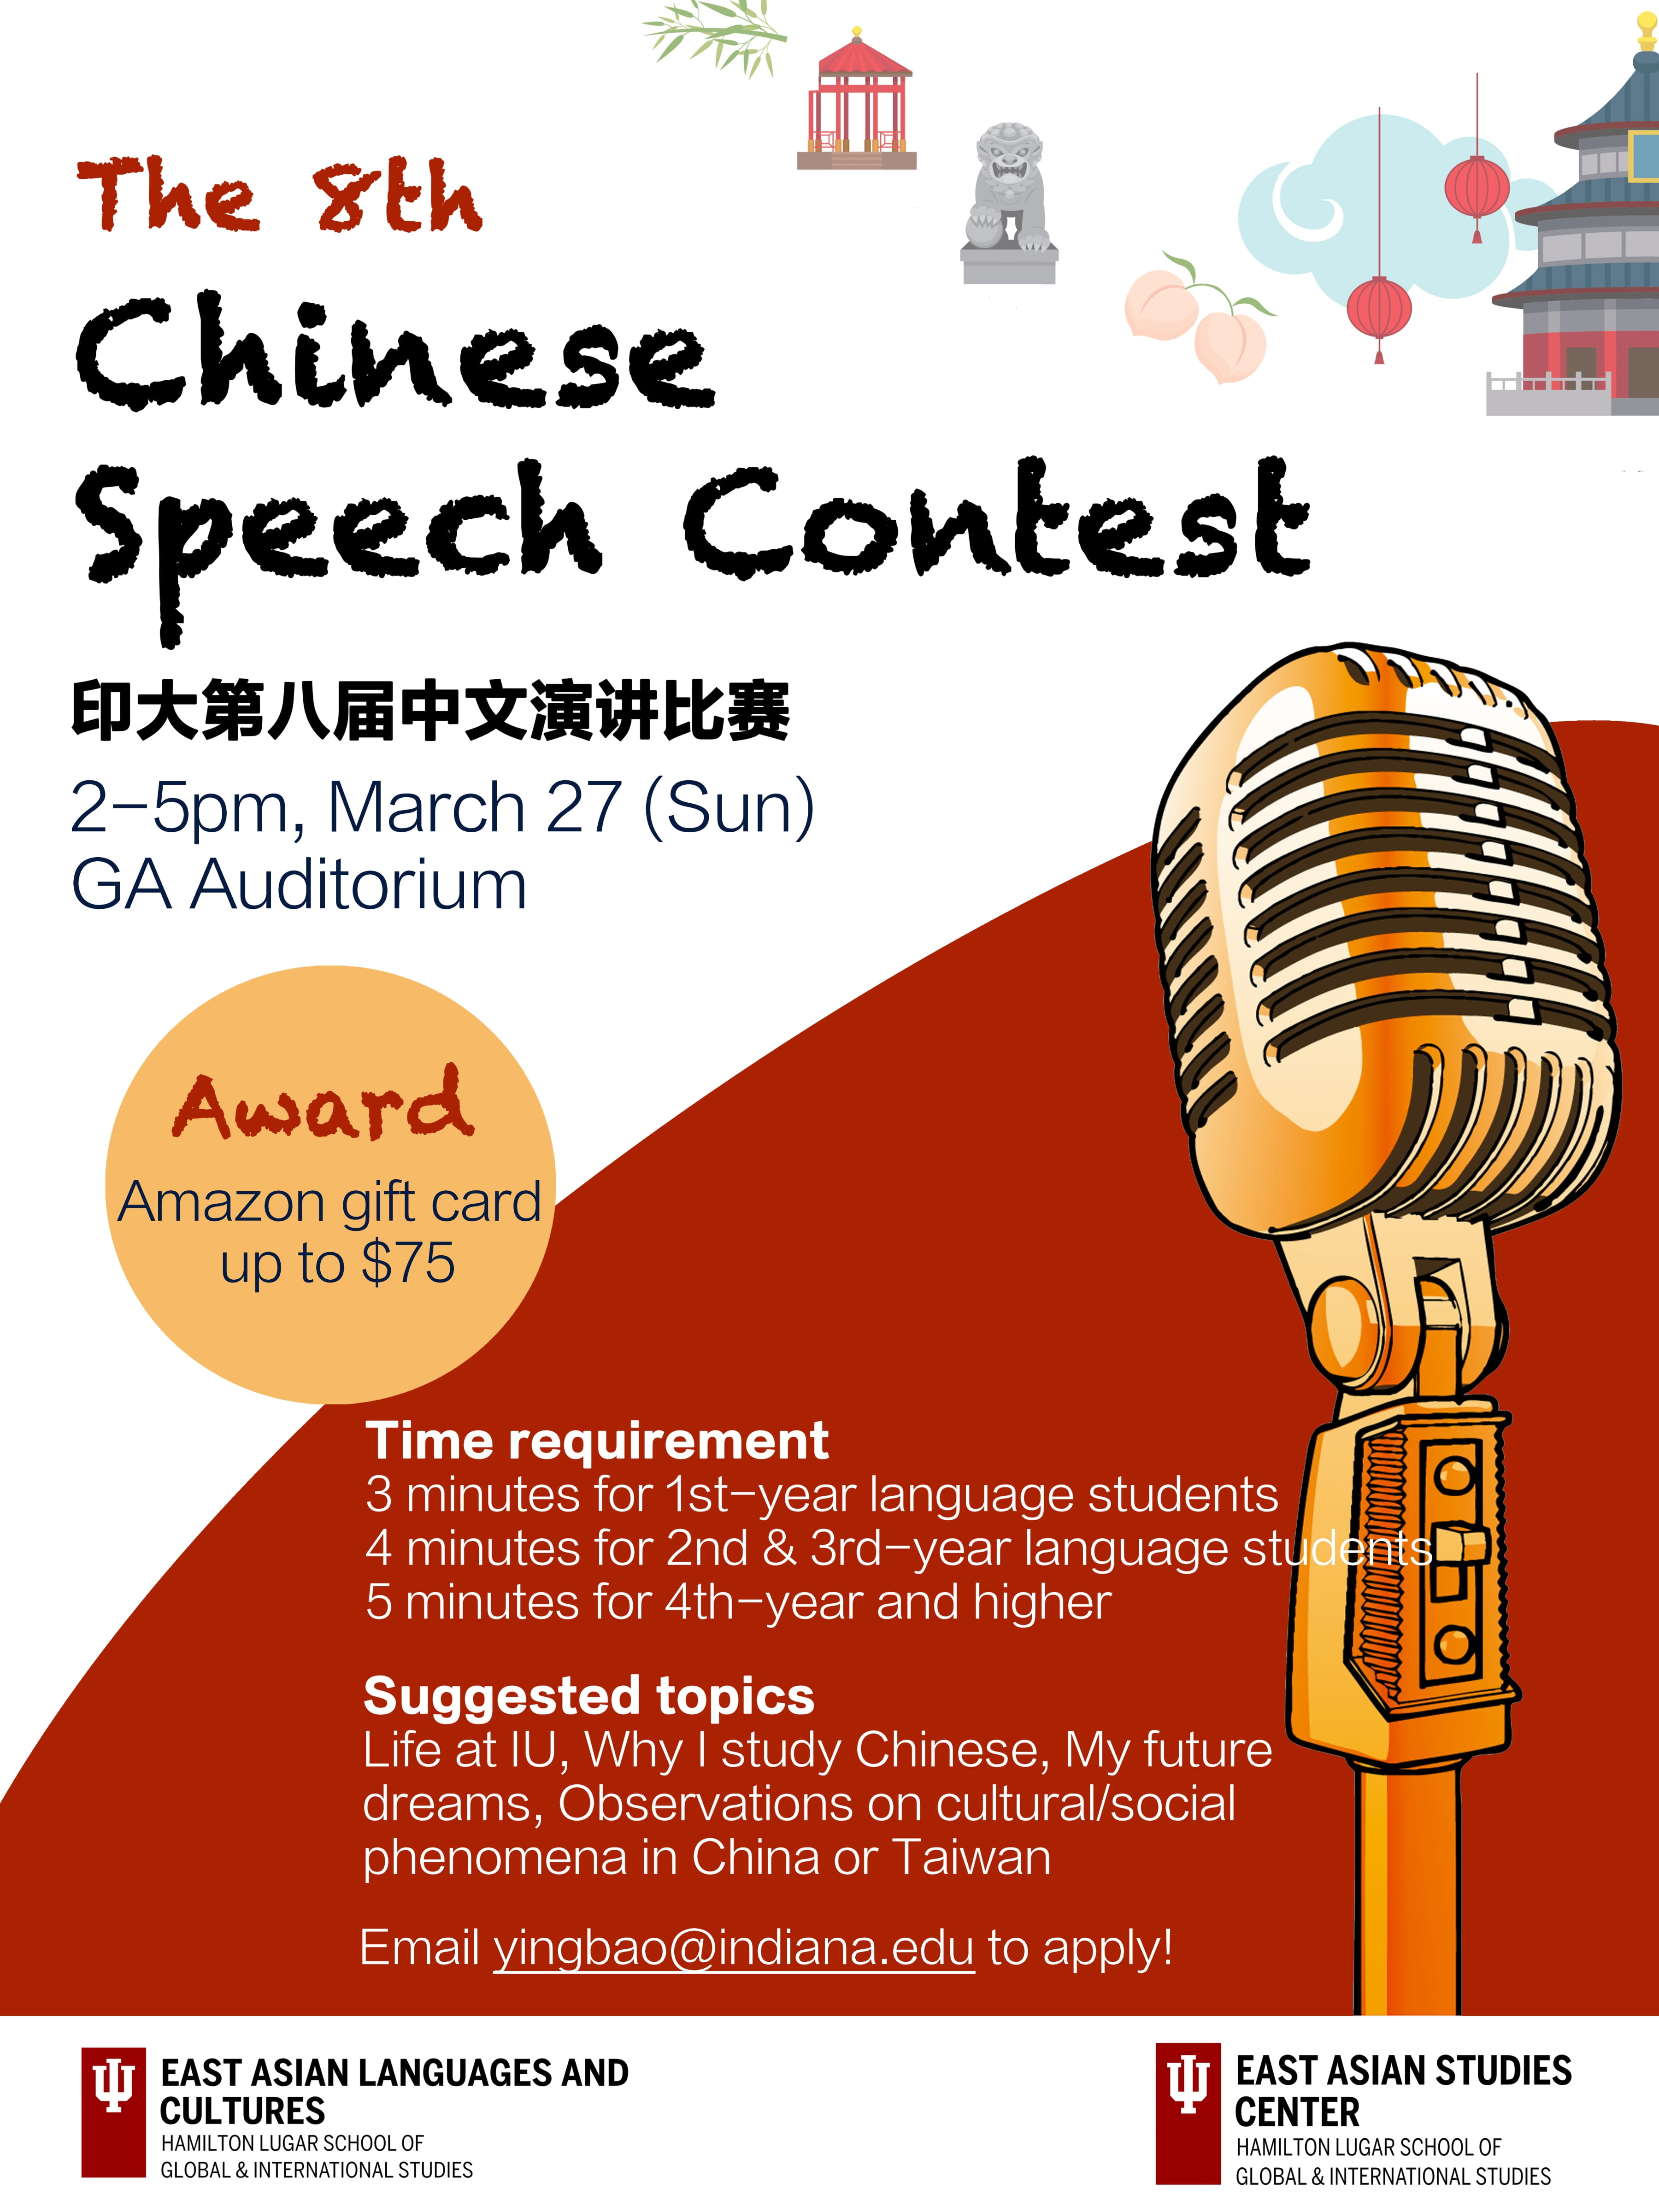 eloquent speech meaning in chinese